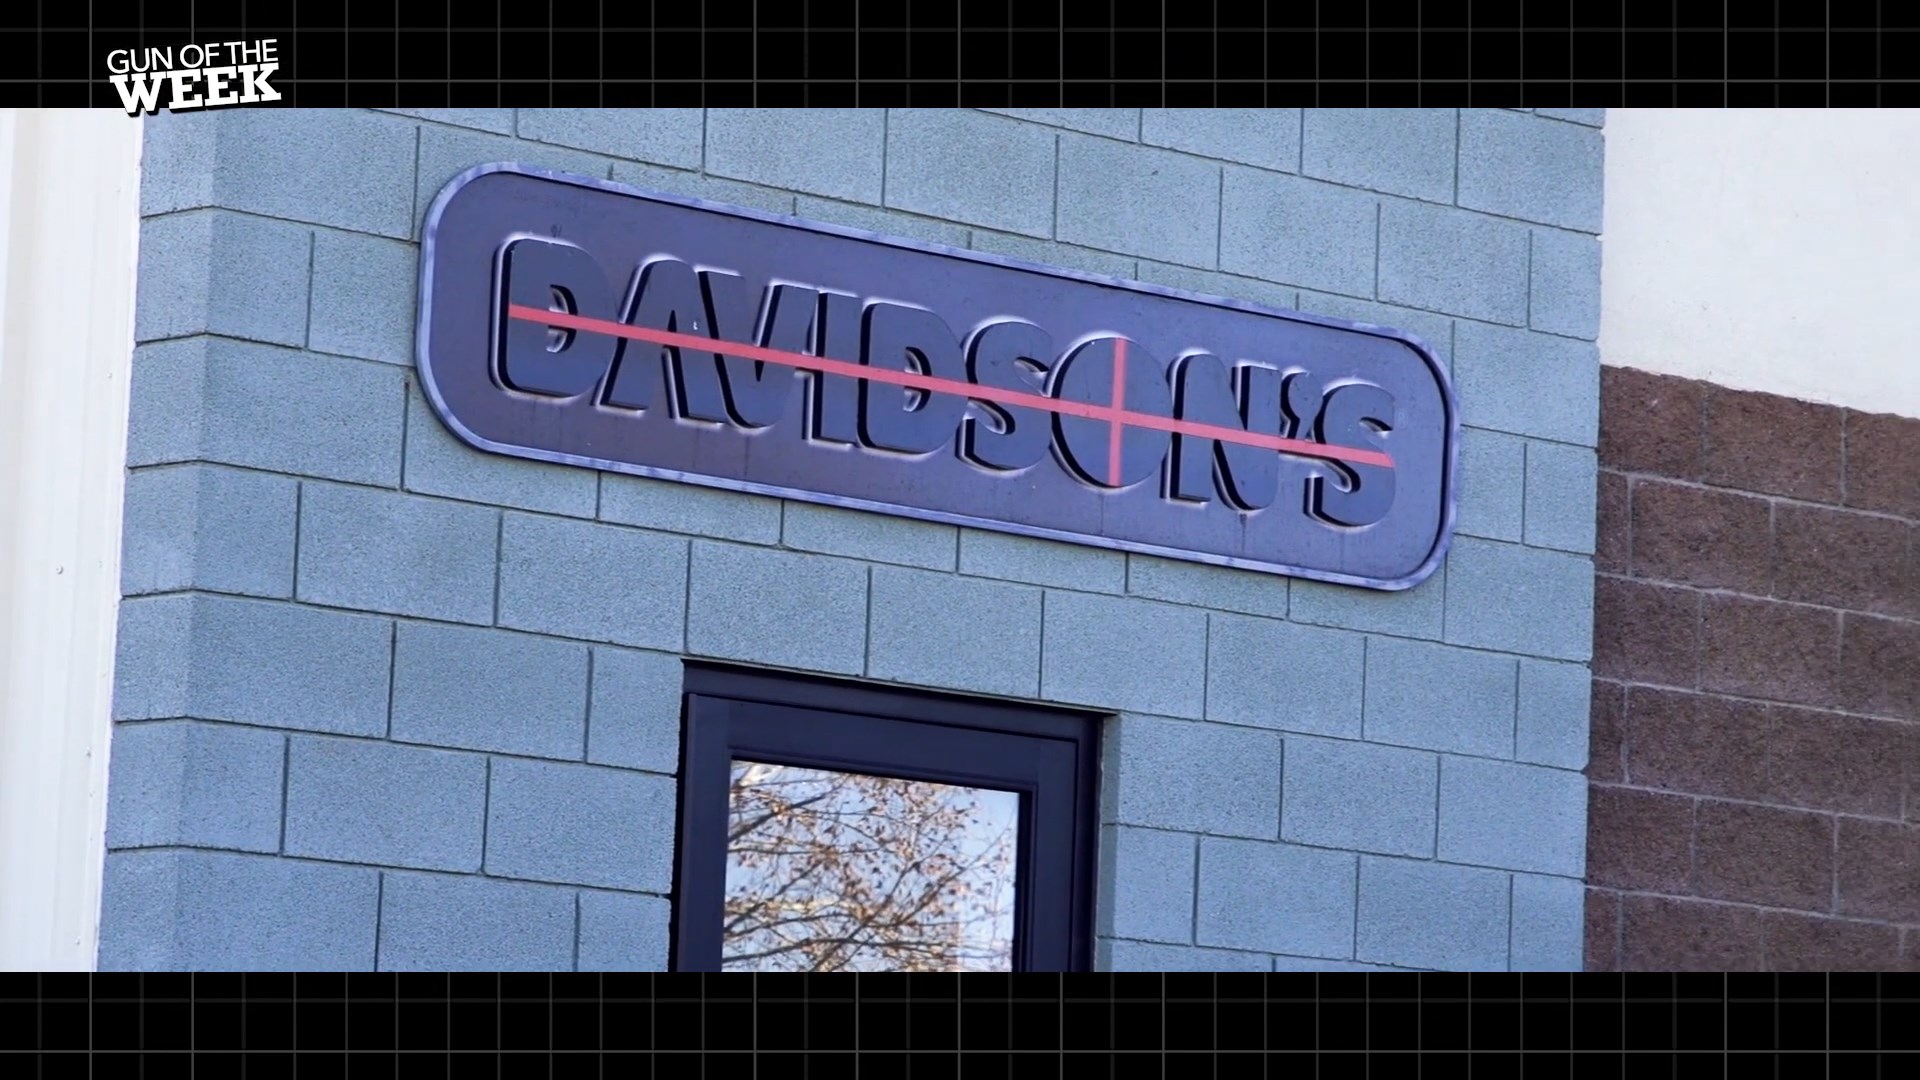 TEXT ON IMAGE GUN OF THE WEEK DAVIDSON's banner on concrete block brick building store front with door